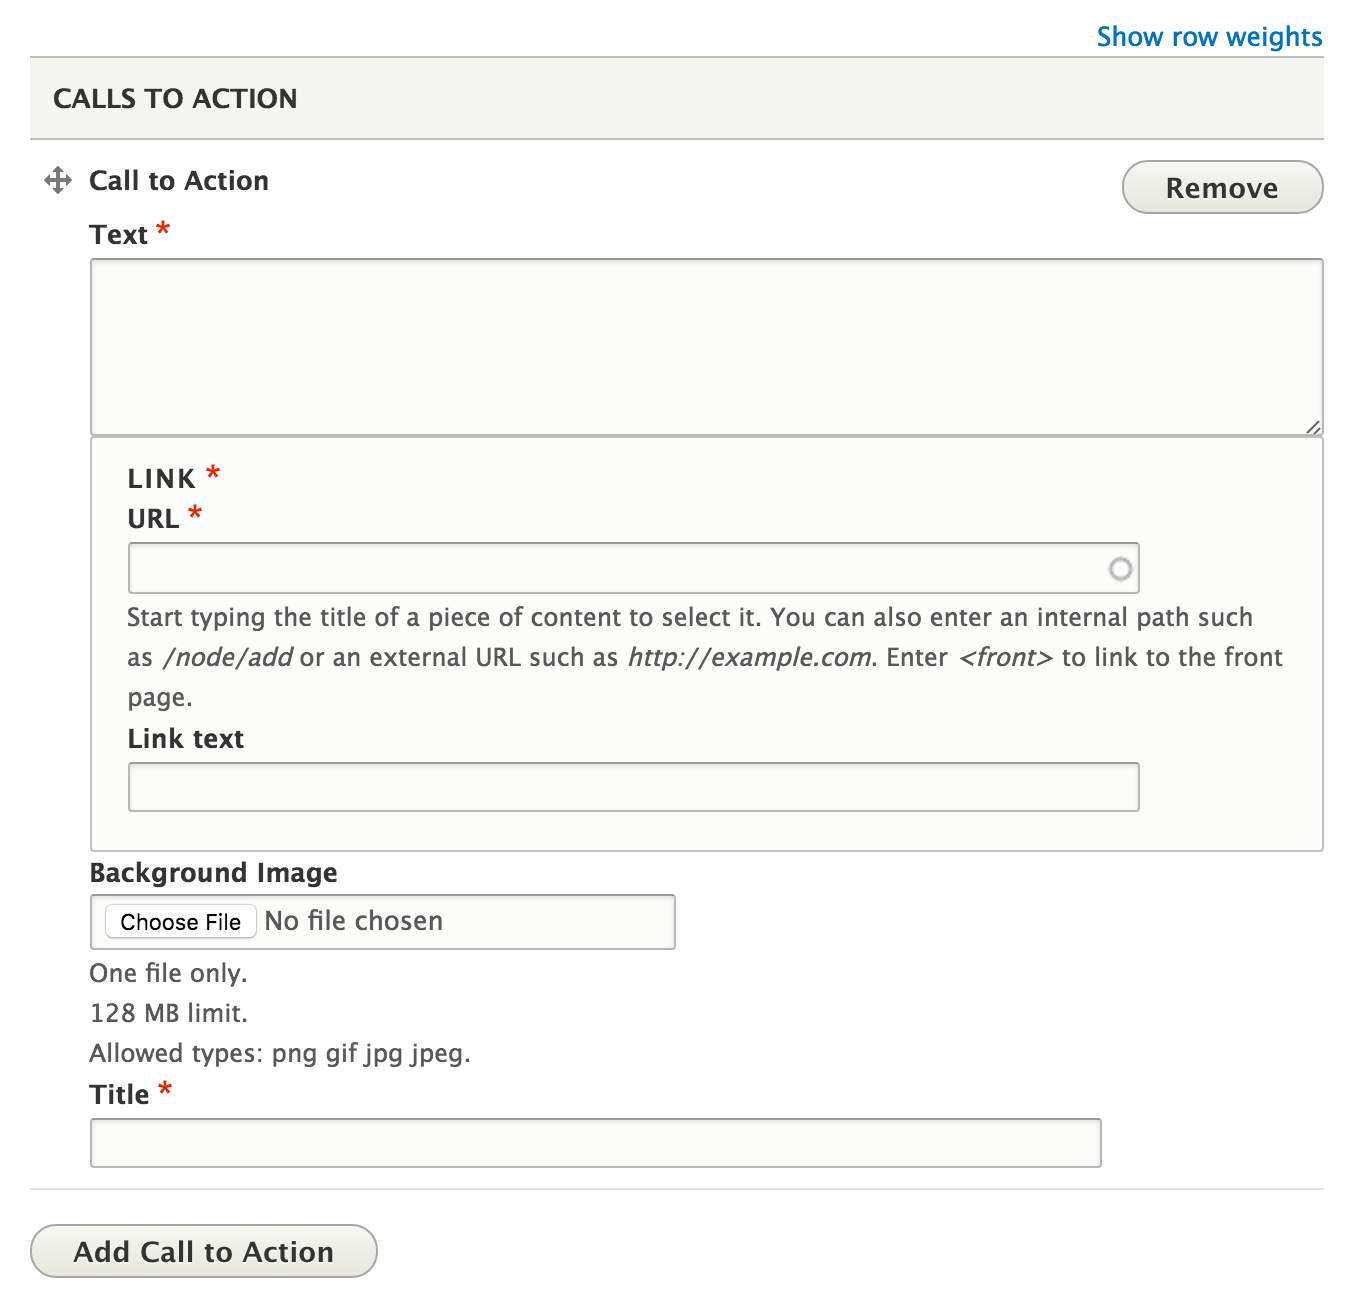 Interface for adding calls to action on the landing page content type